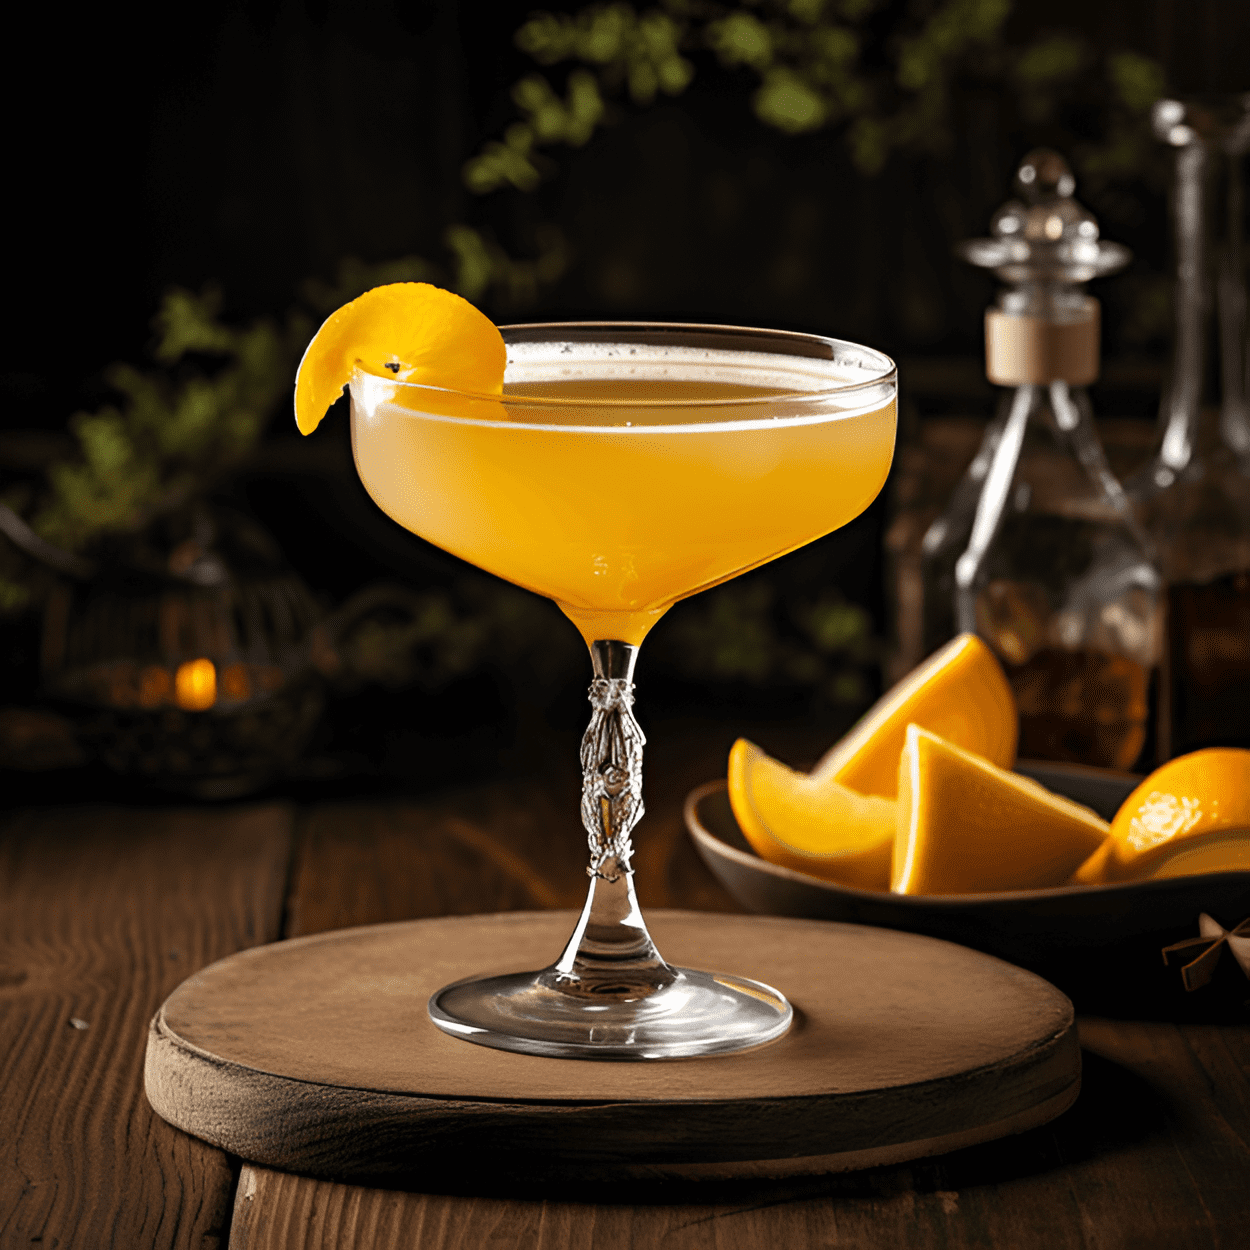 Lady Be Good Cocktail Recipe - The Lady Be Good cocktail is a delightful mix of sweet, tart, and slightly bitter flavors. It has a smooth, velvety texture with a hint of fruitiness from the orange liqueur and a subtle warmth from the whiskey.